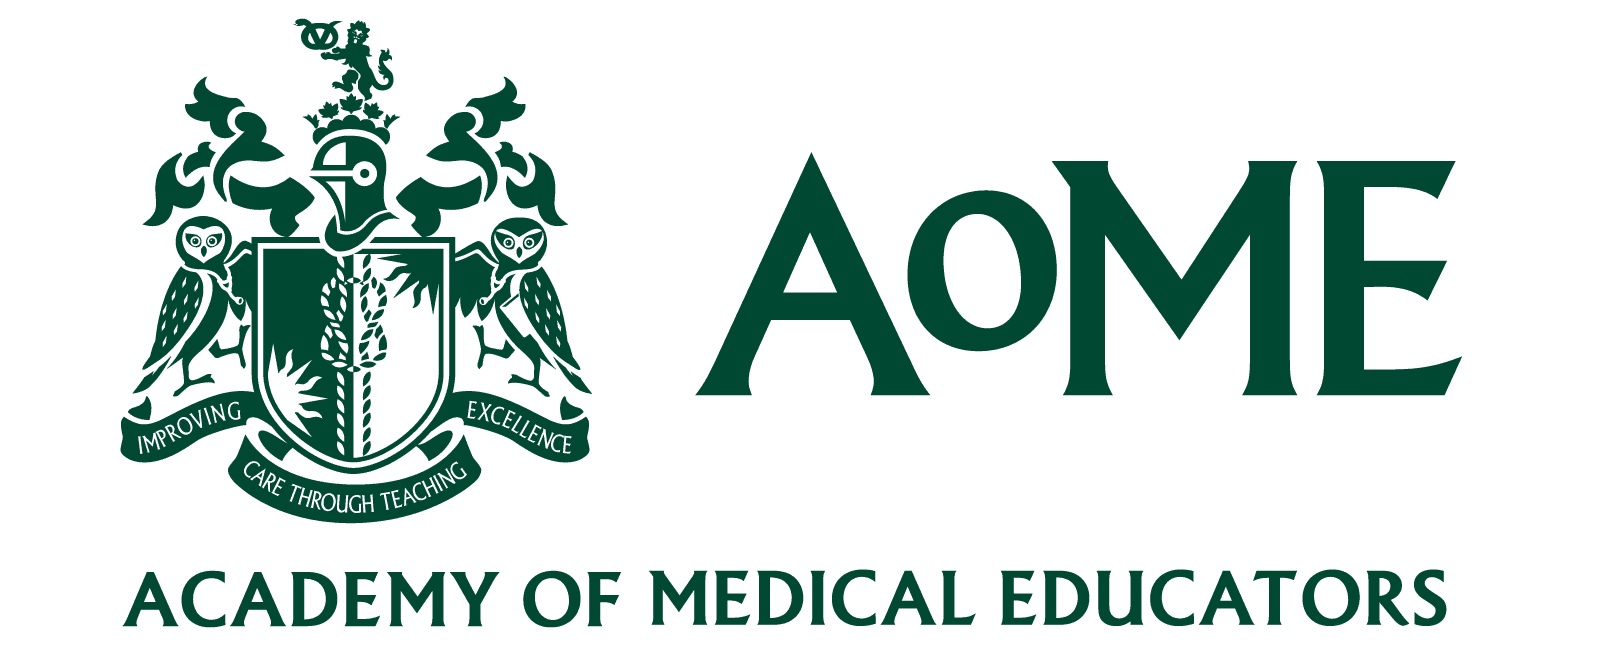 Academy for Medical Educators accredited logo